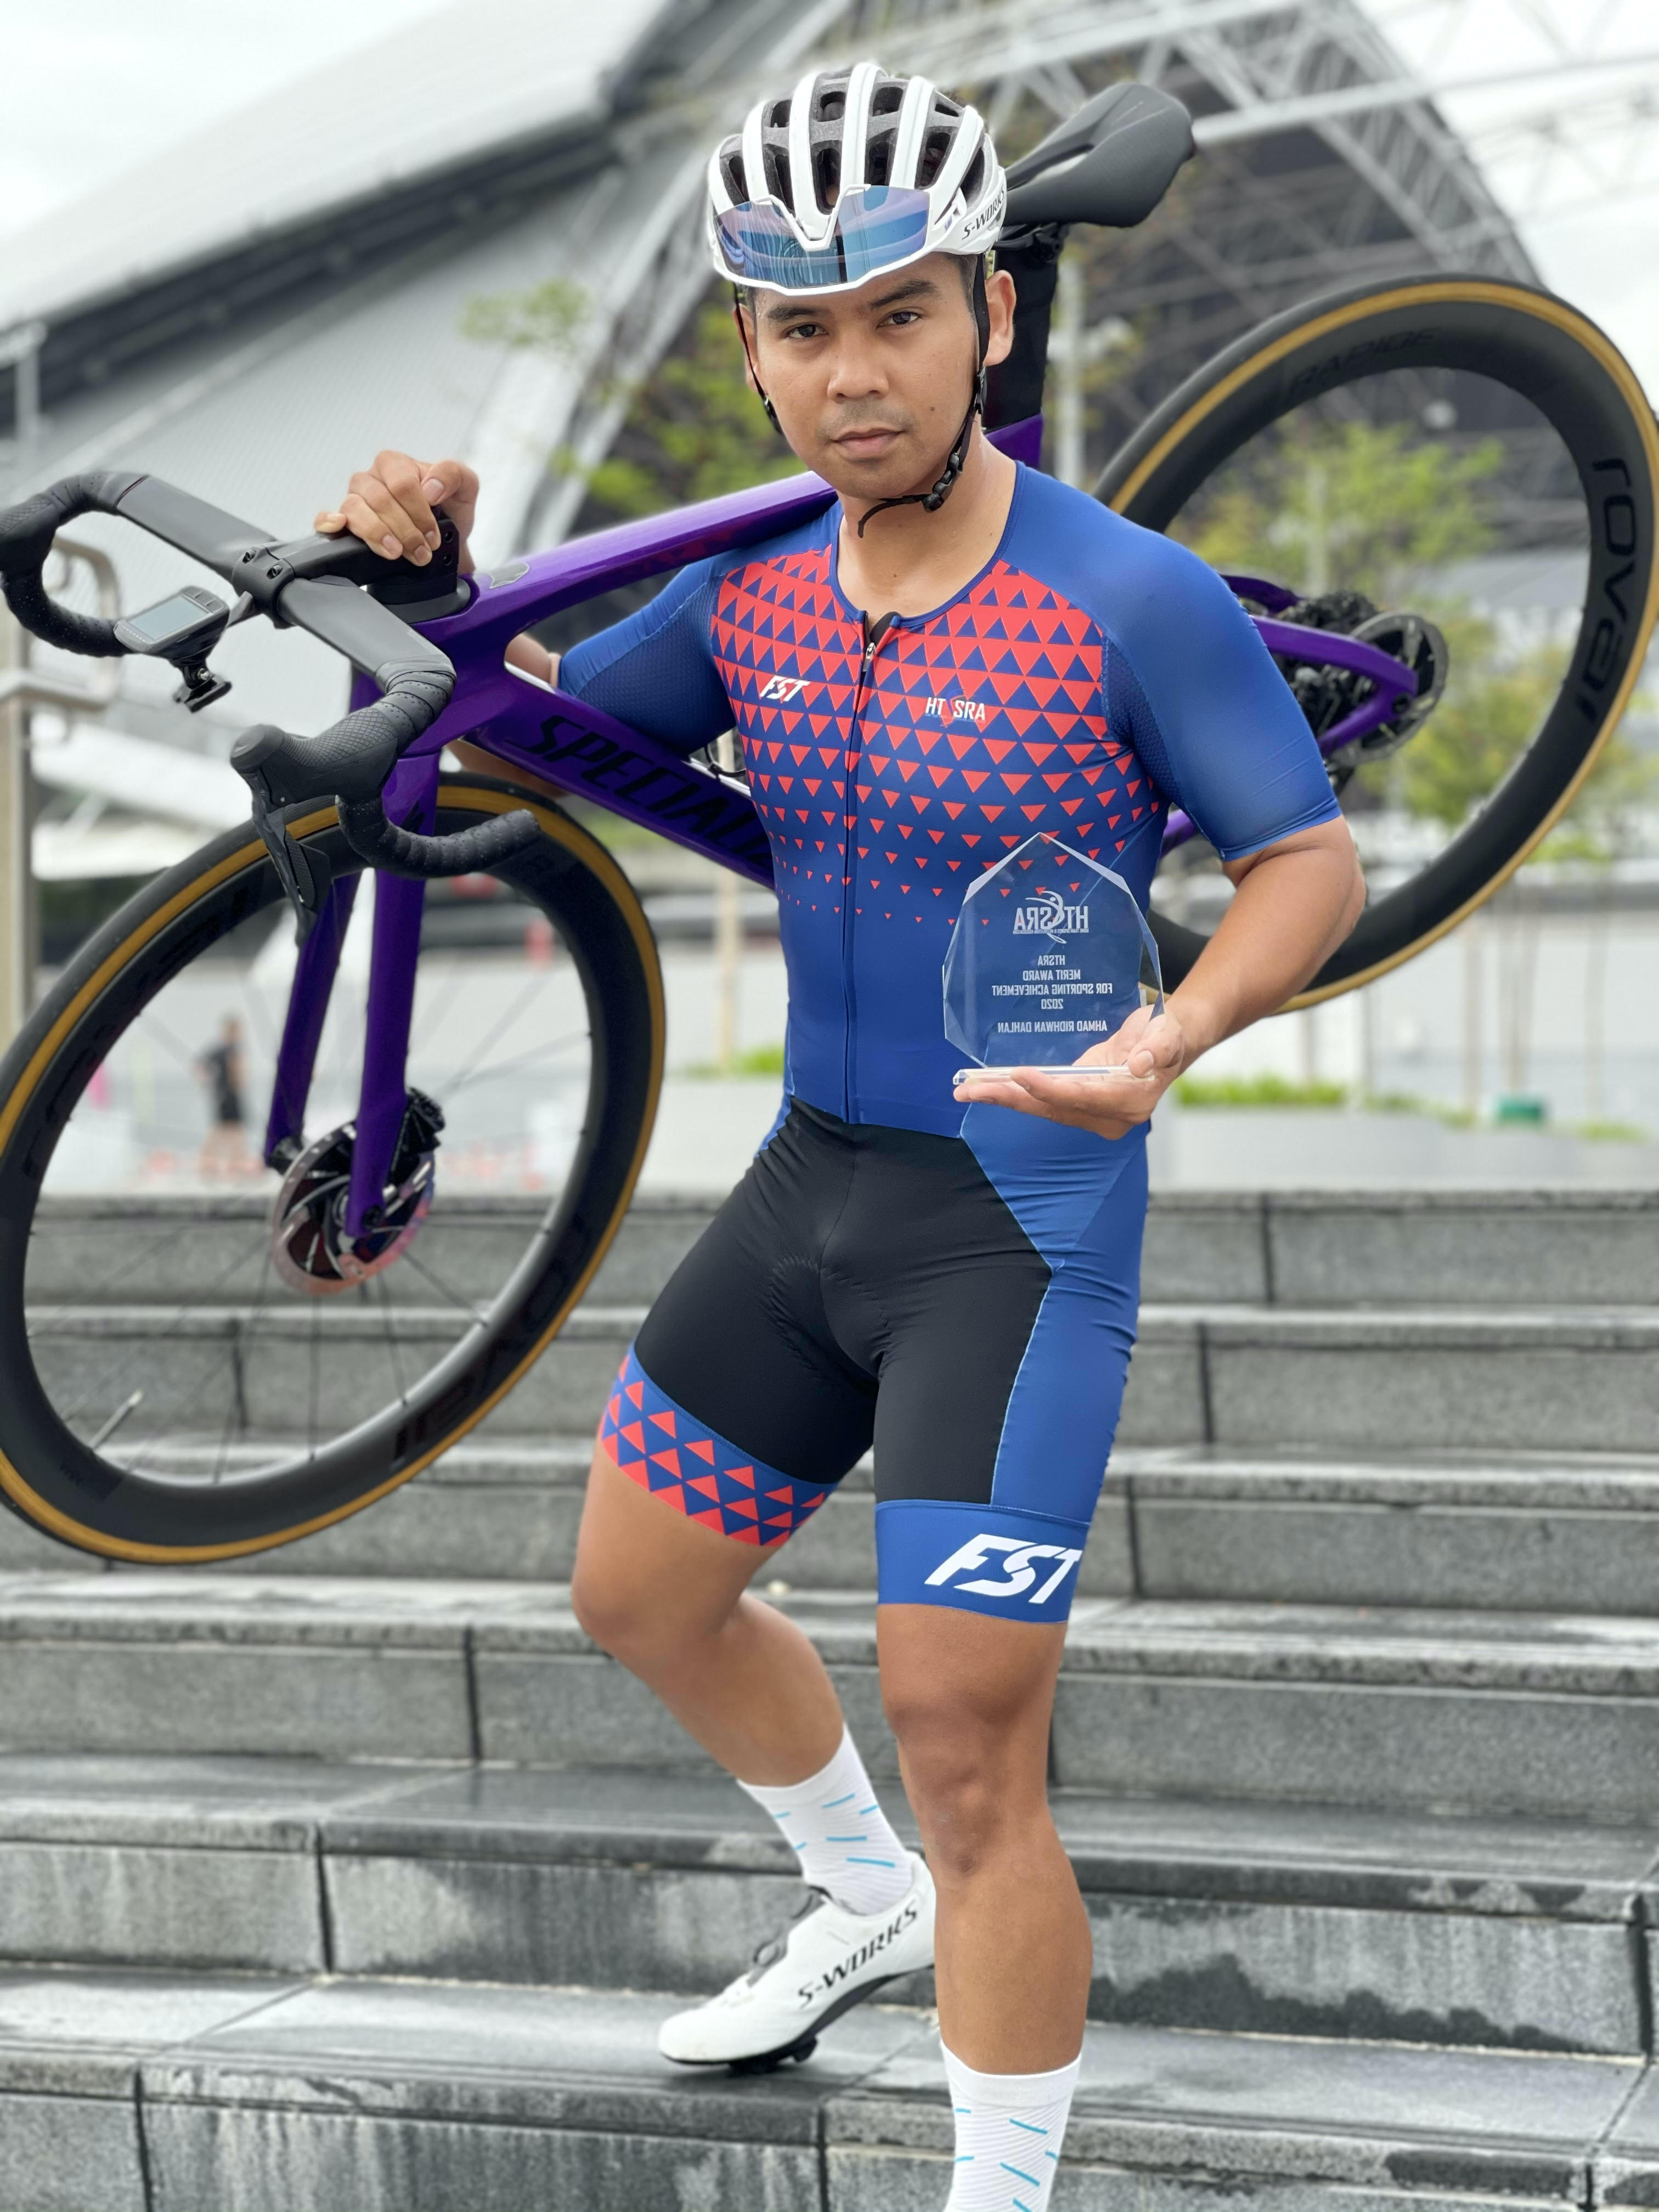 Cycling Shares Training Tips to Winning Races | SCDF